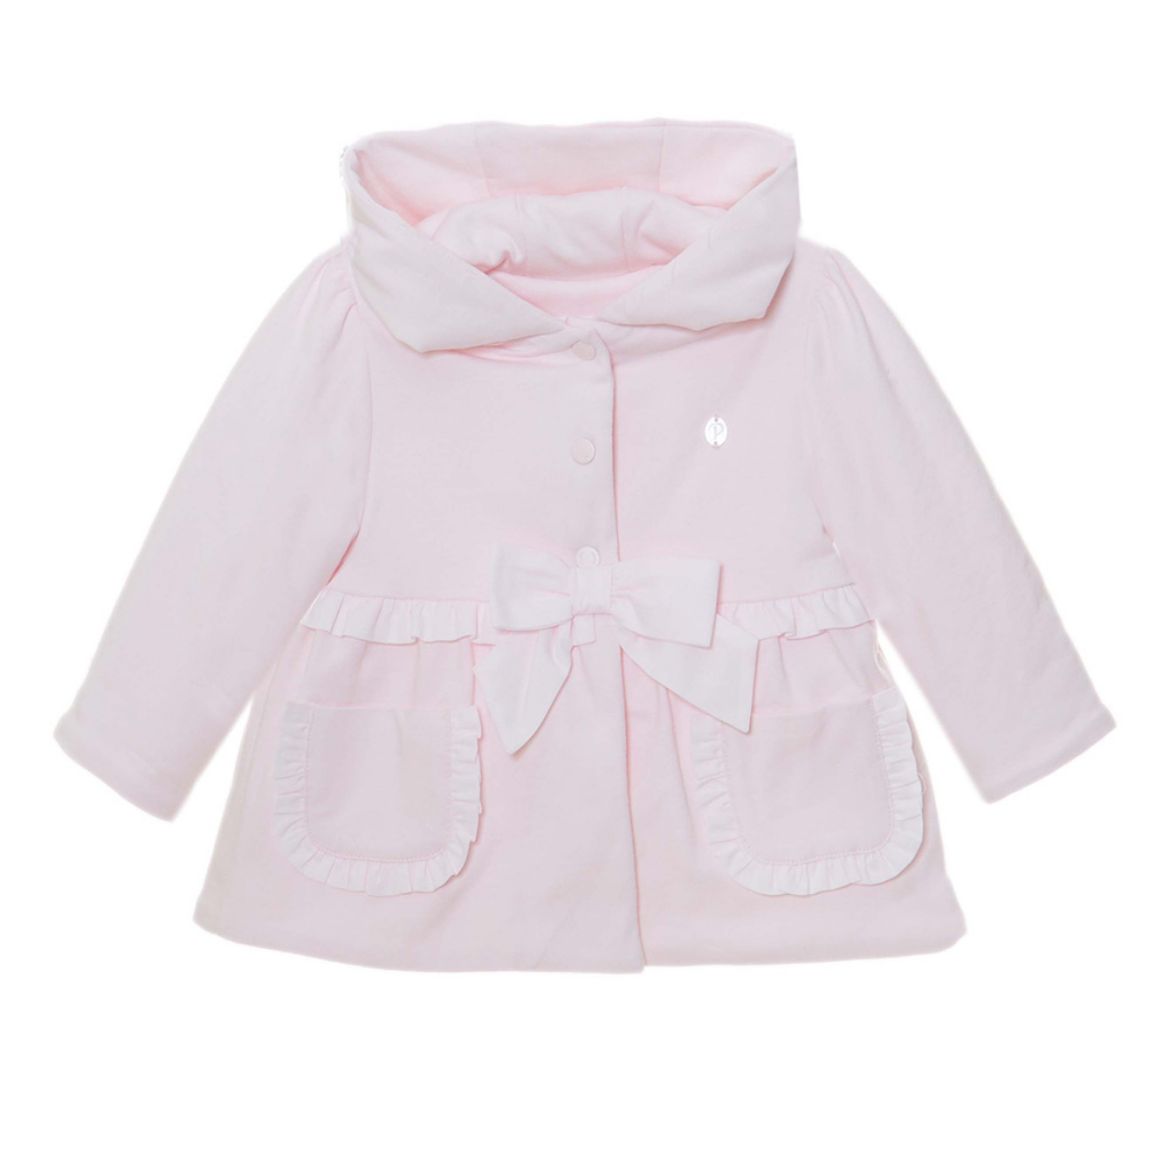 Picture of Patachou Girls Pink Bow Cotton Jacket